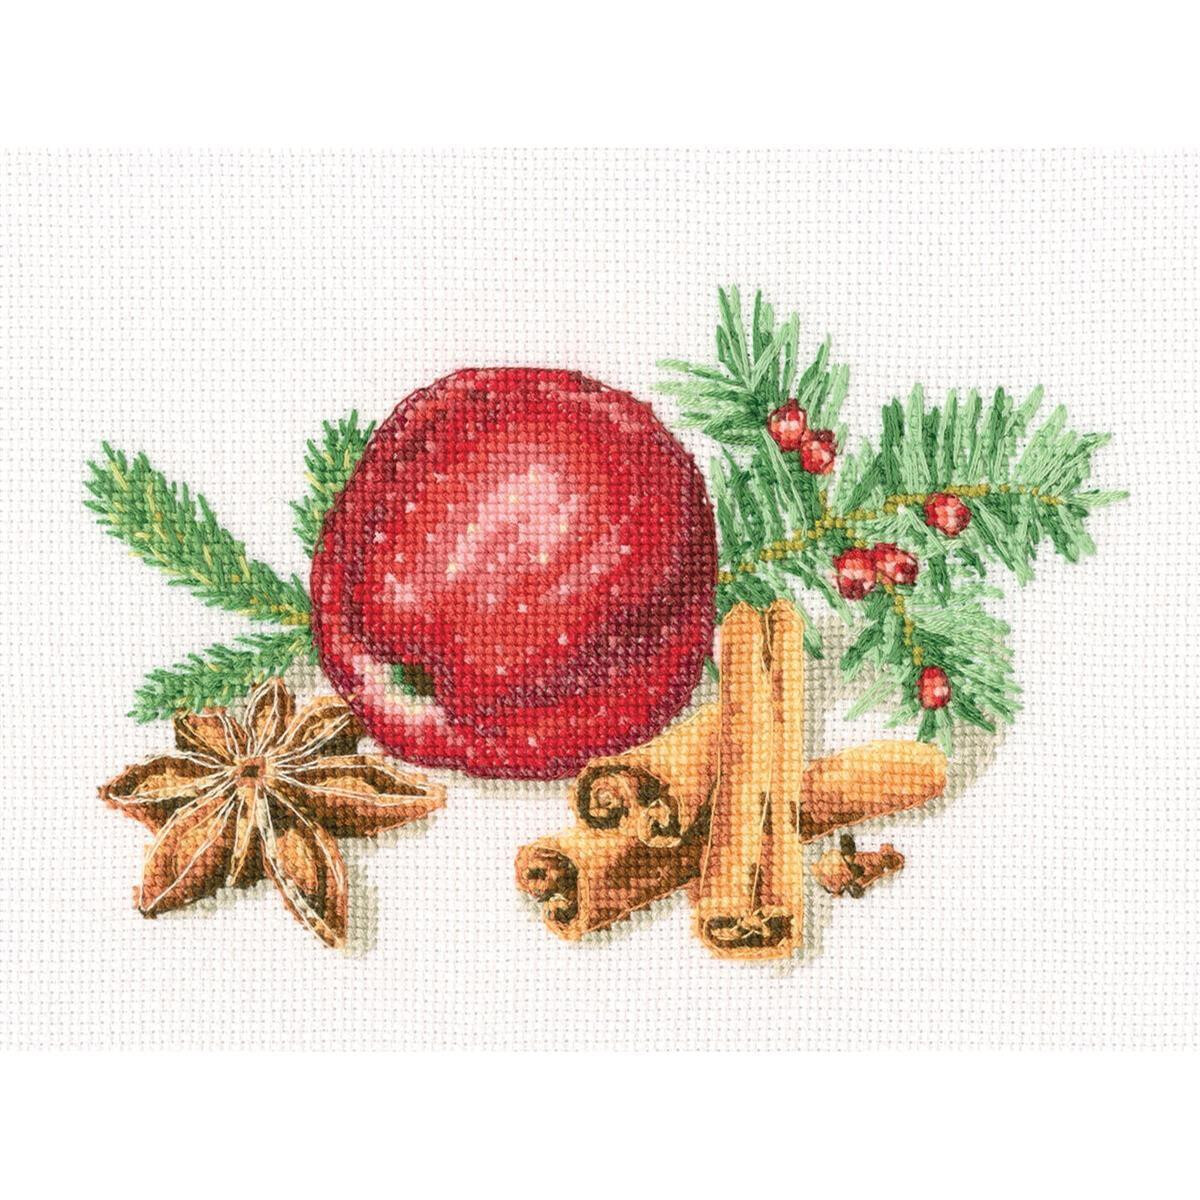 RTO counted Cross Stitch Kit "Warm flavours"...